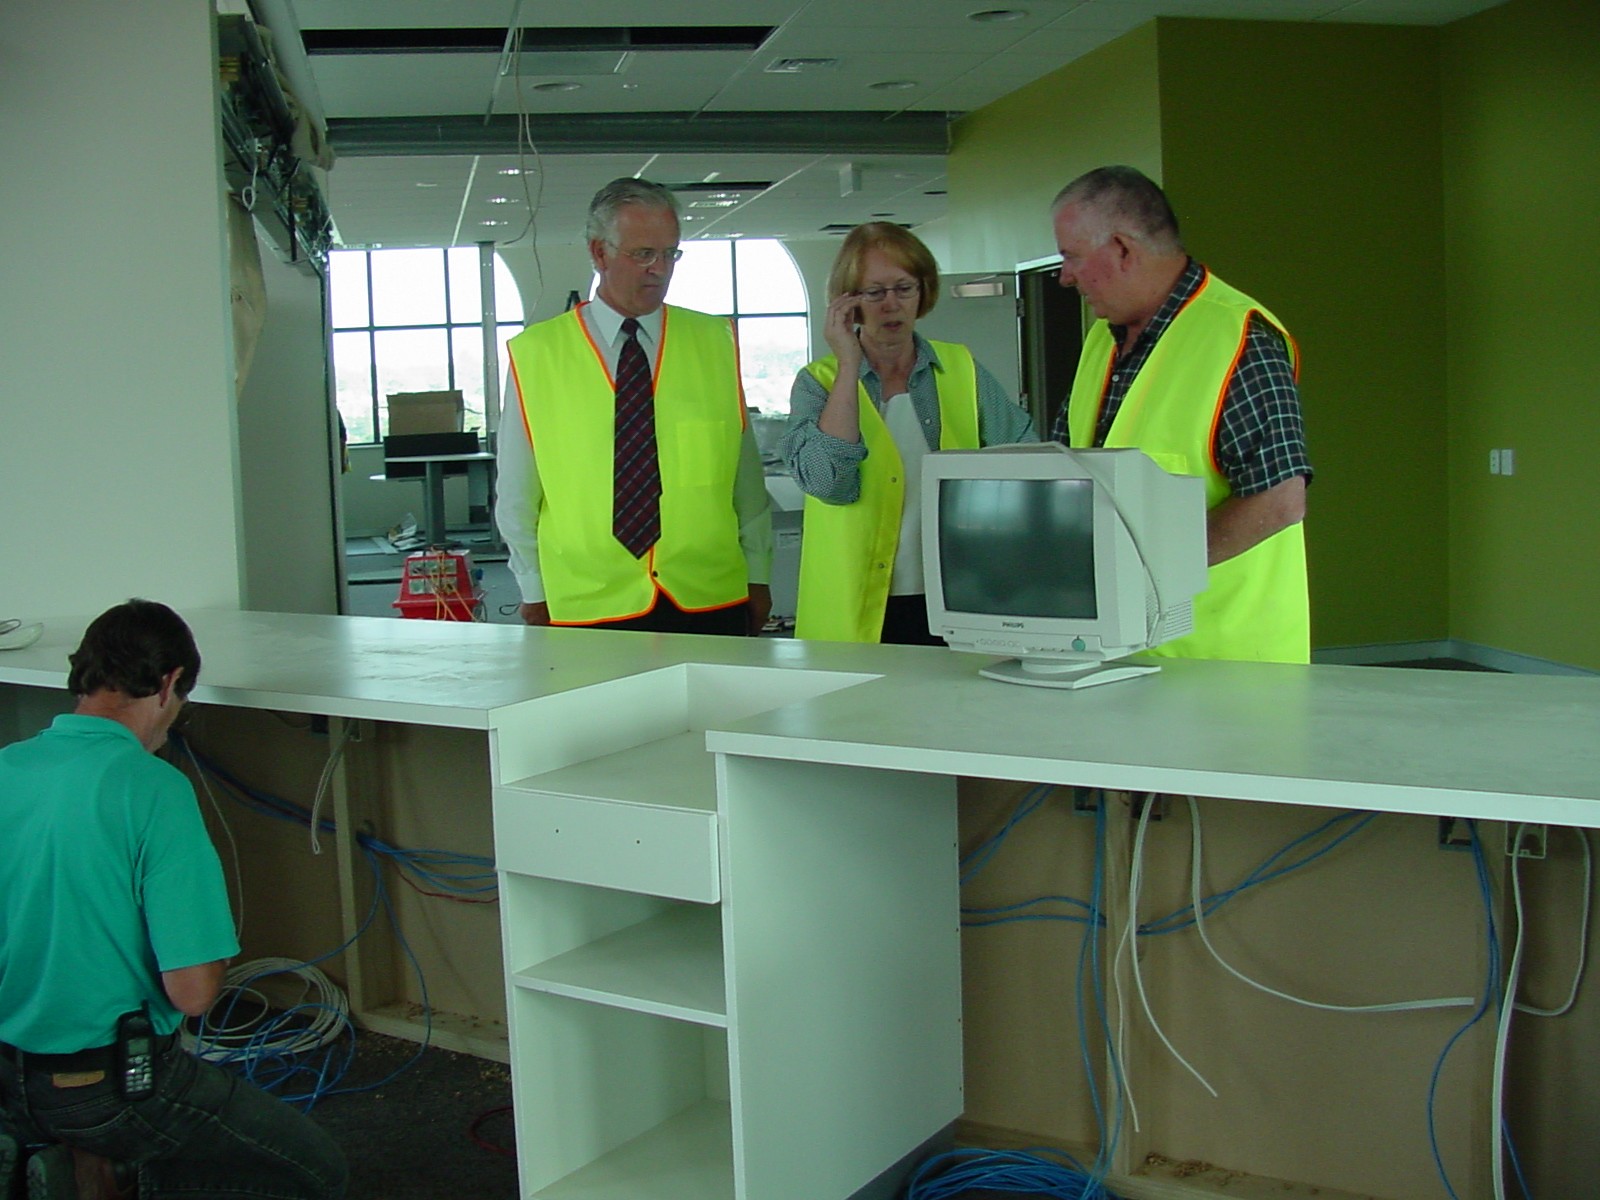 Three people in fluoro vests look over a computer terminal in a library under construction